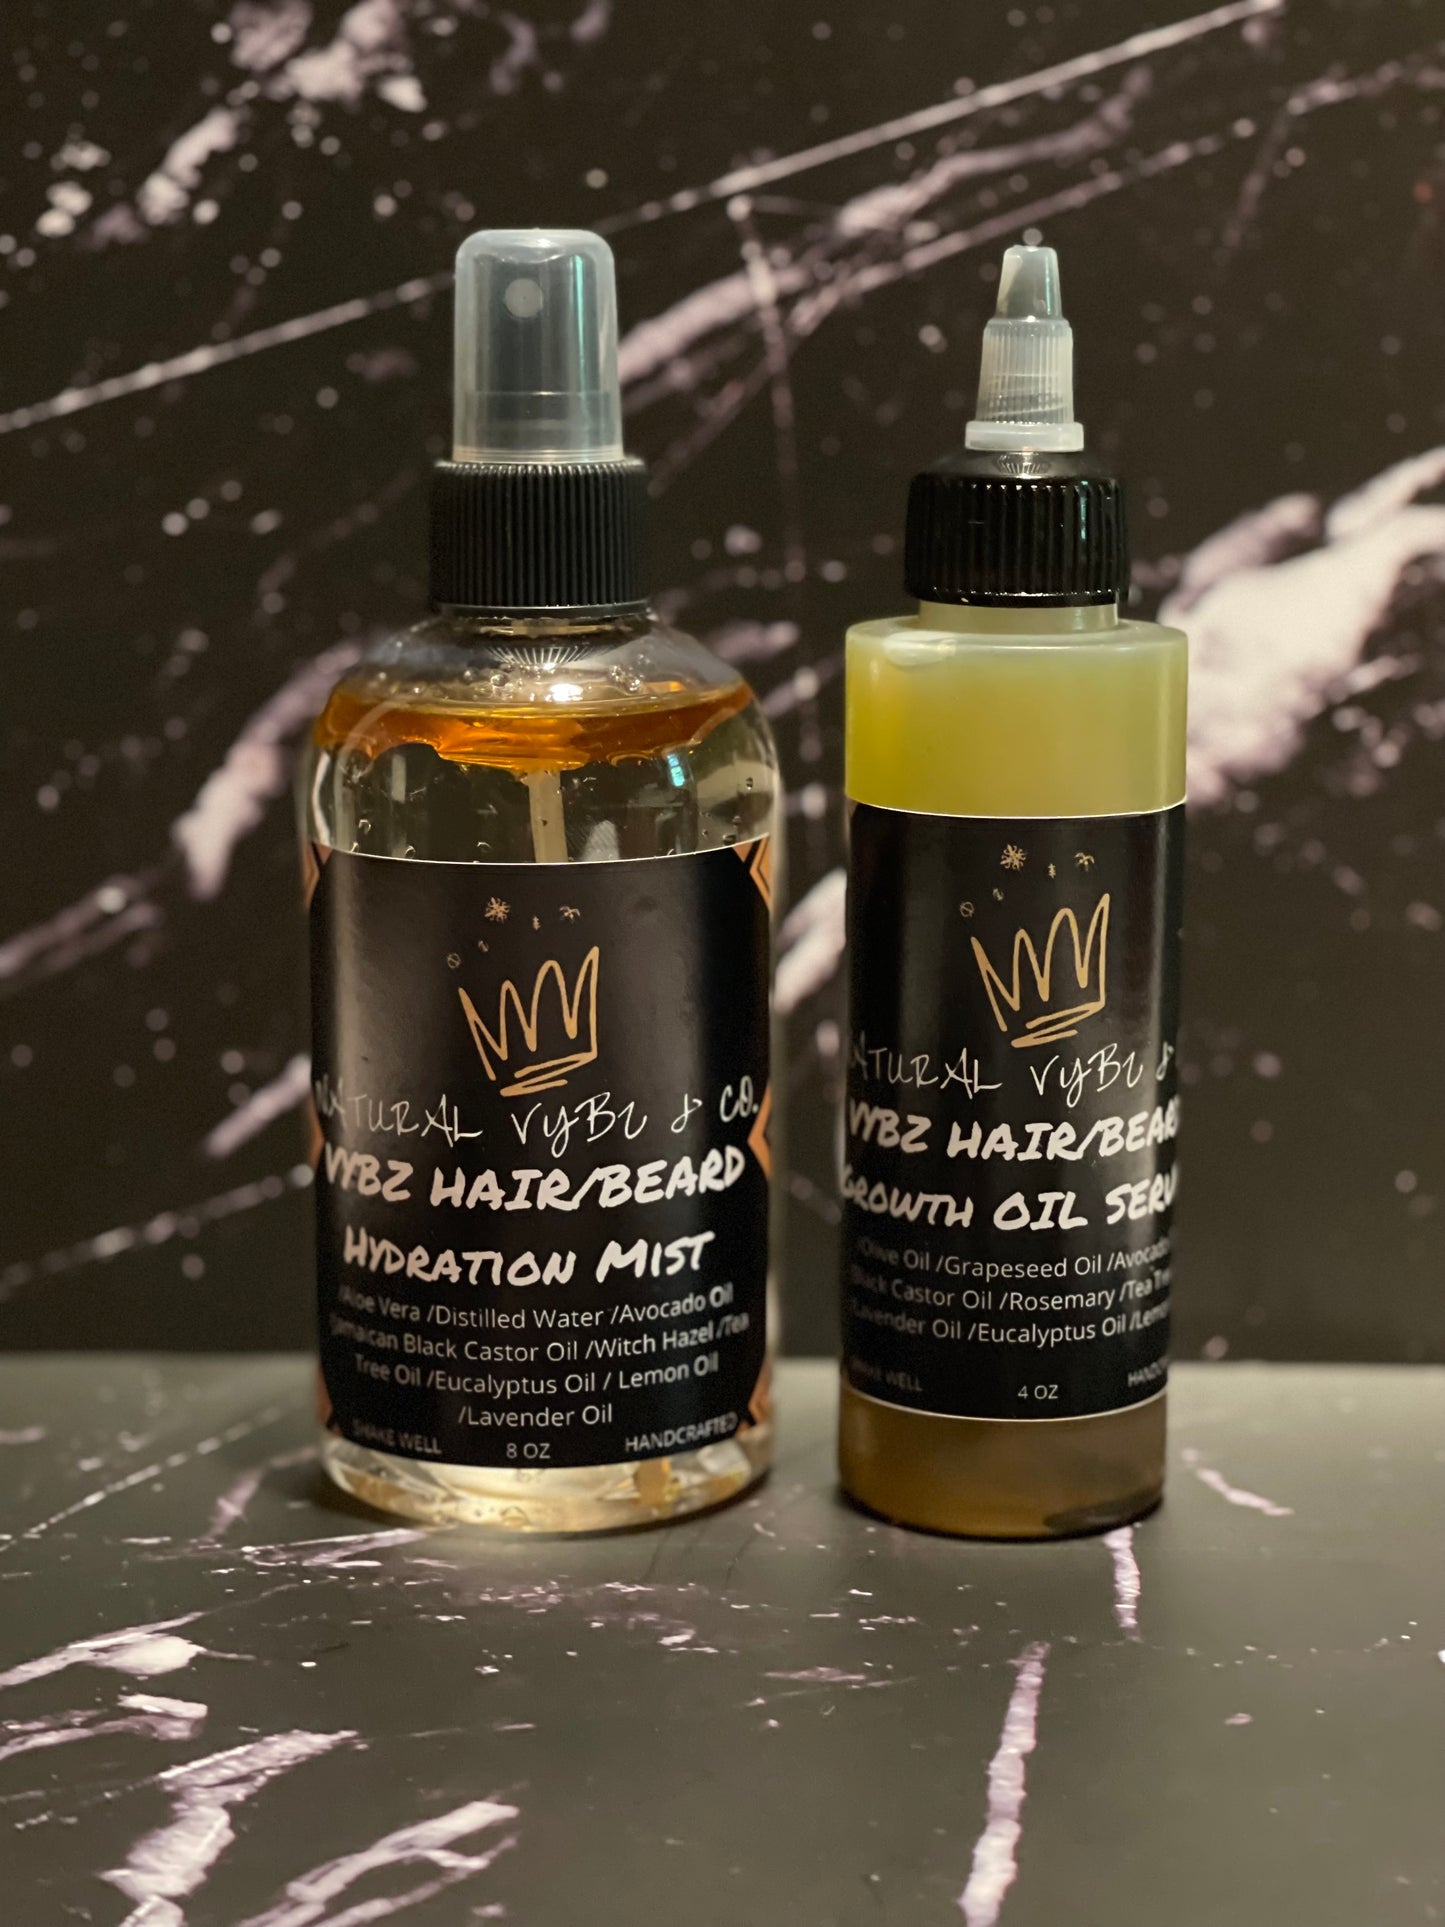 Hair and beard hydration mist with natural oils to moisturize hair and beard with infused growth oil